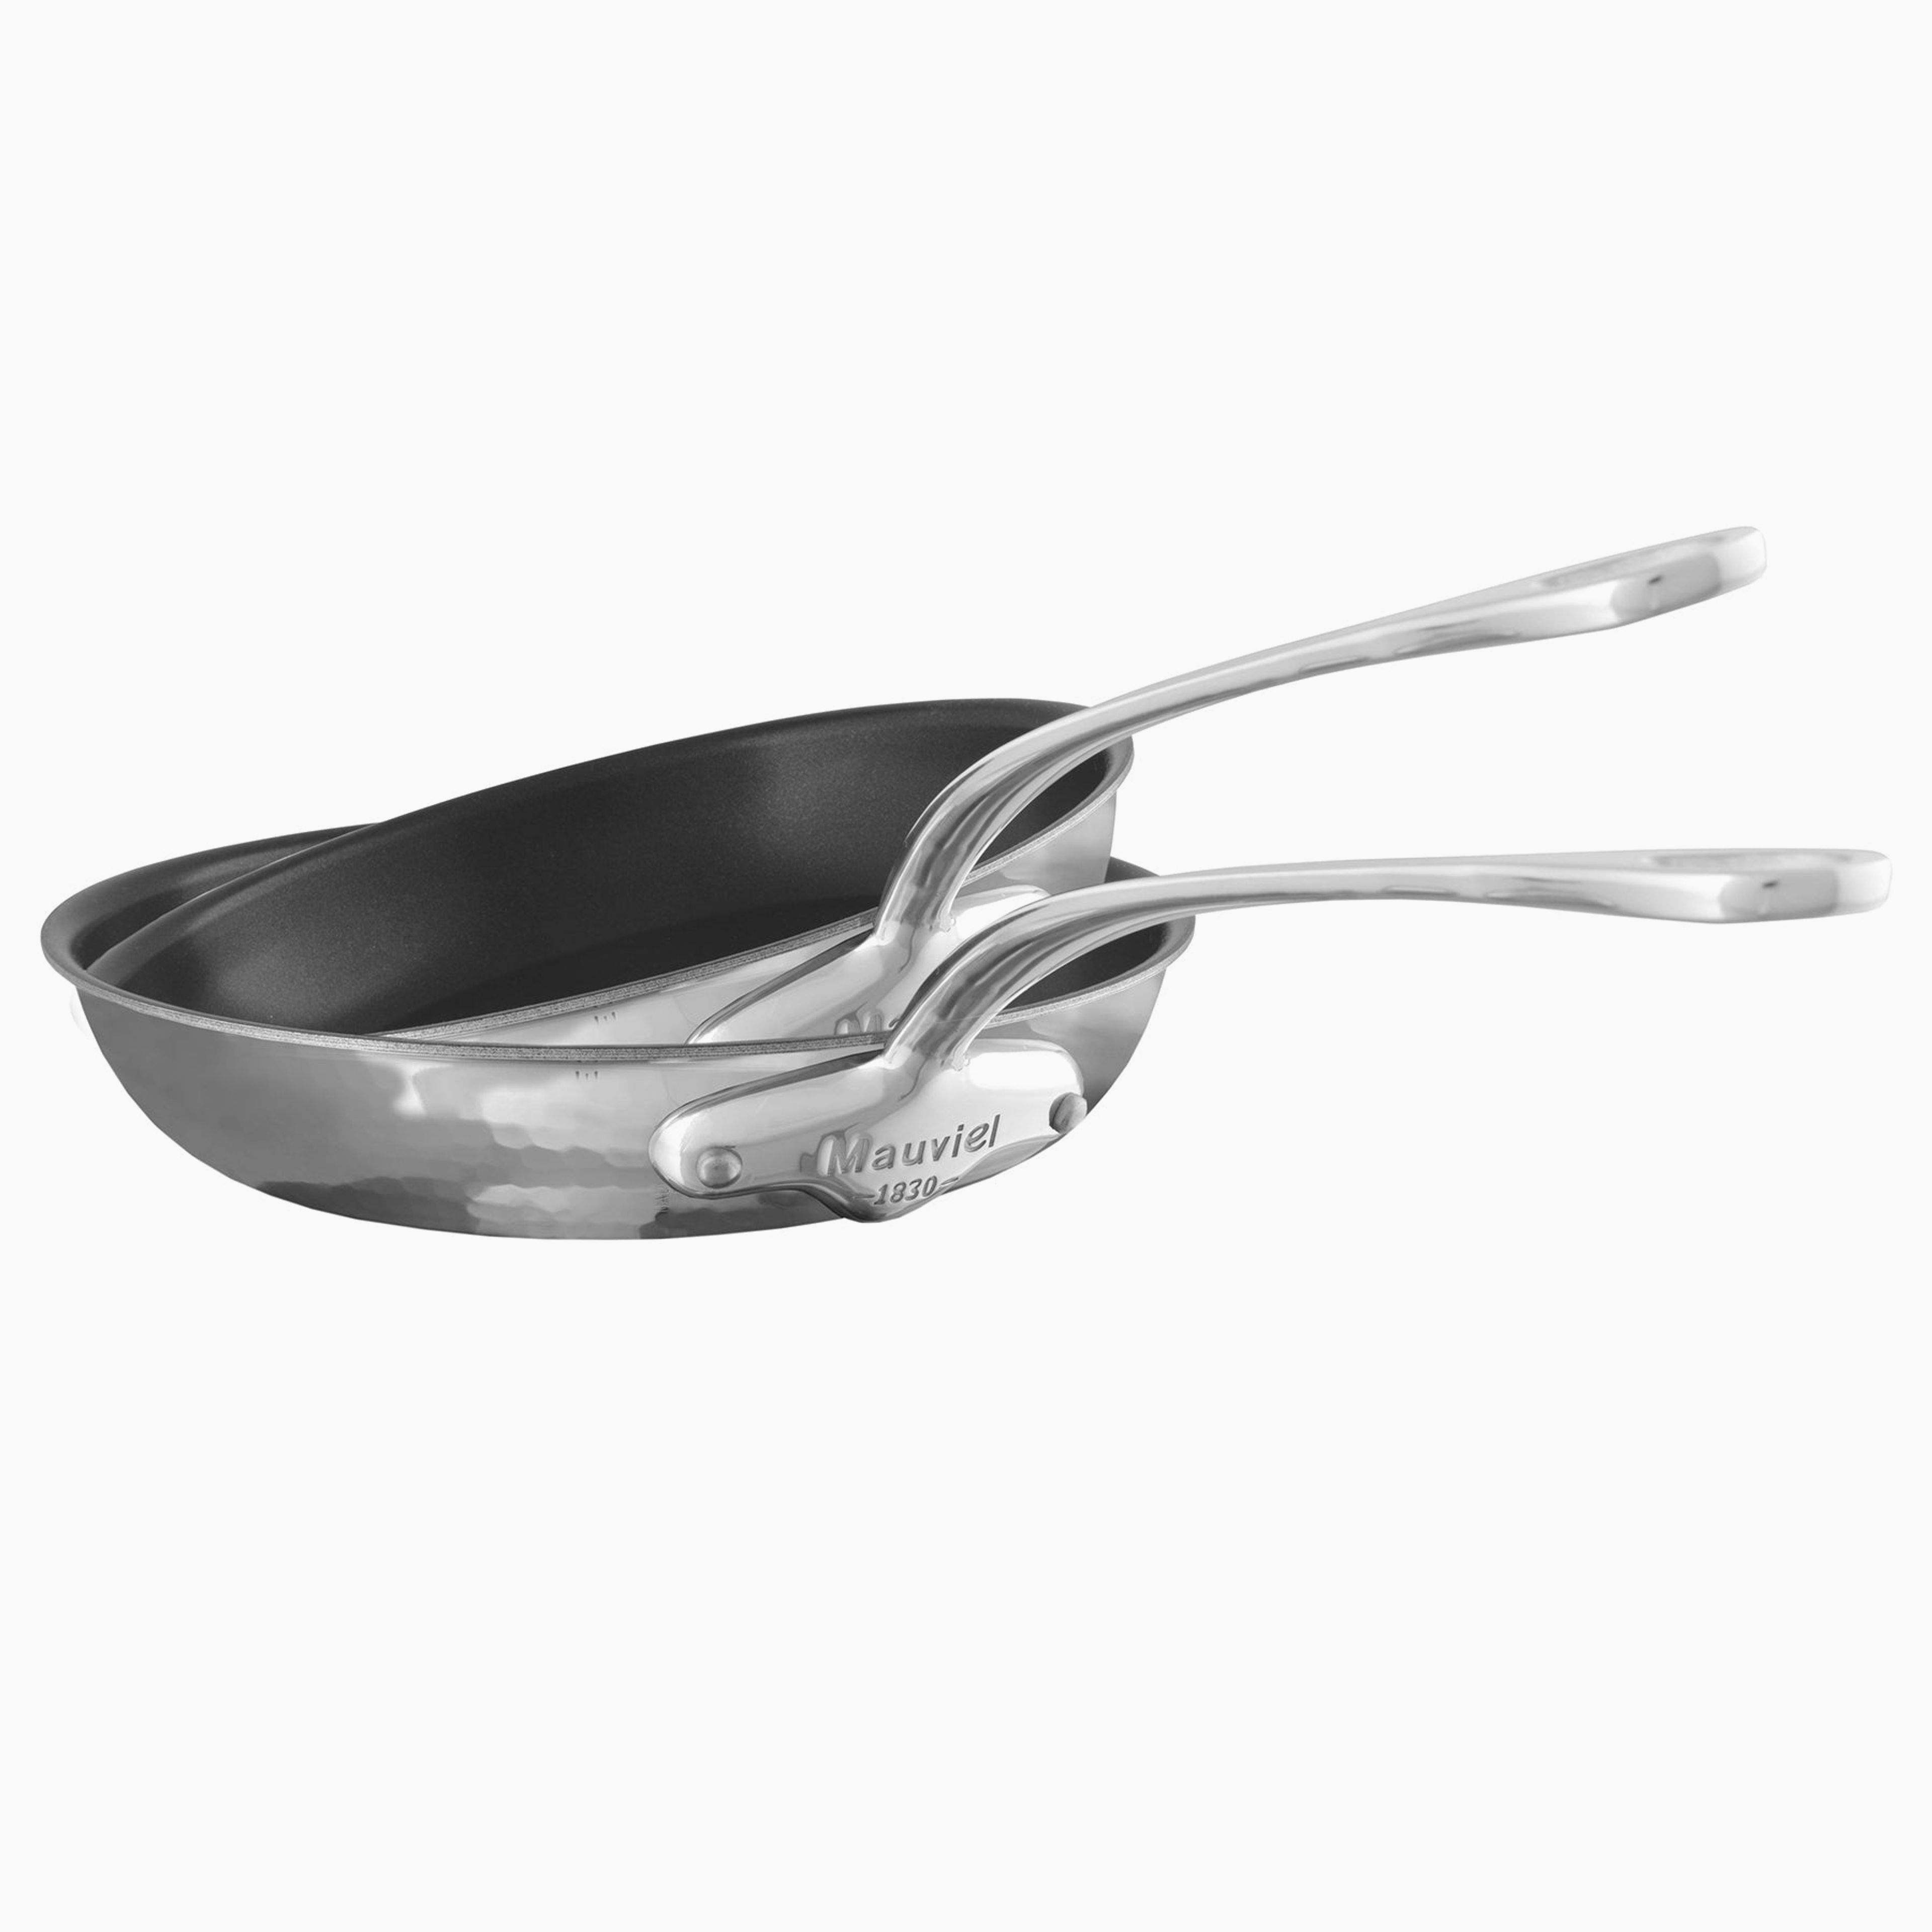 Mauviel M'ELITE Hammered 5-Ply 2-Piece Nonstick Frying Pan Set With Cast Stainless Steel Handles